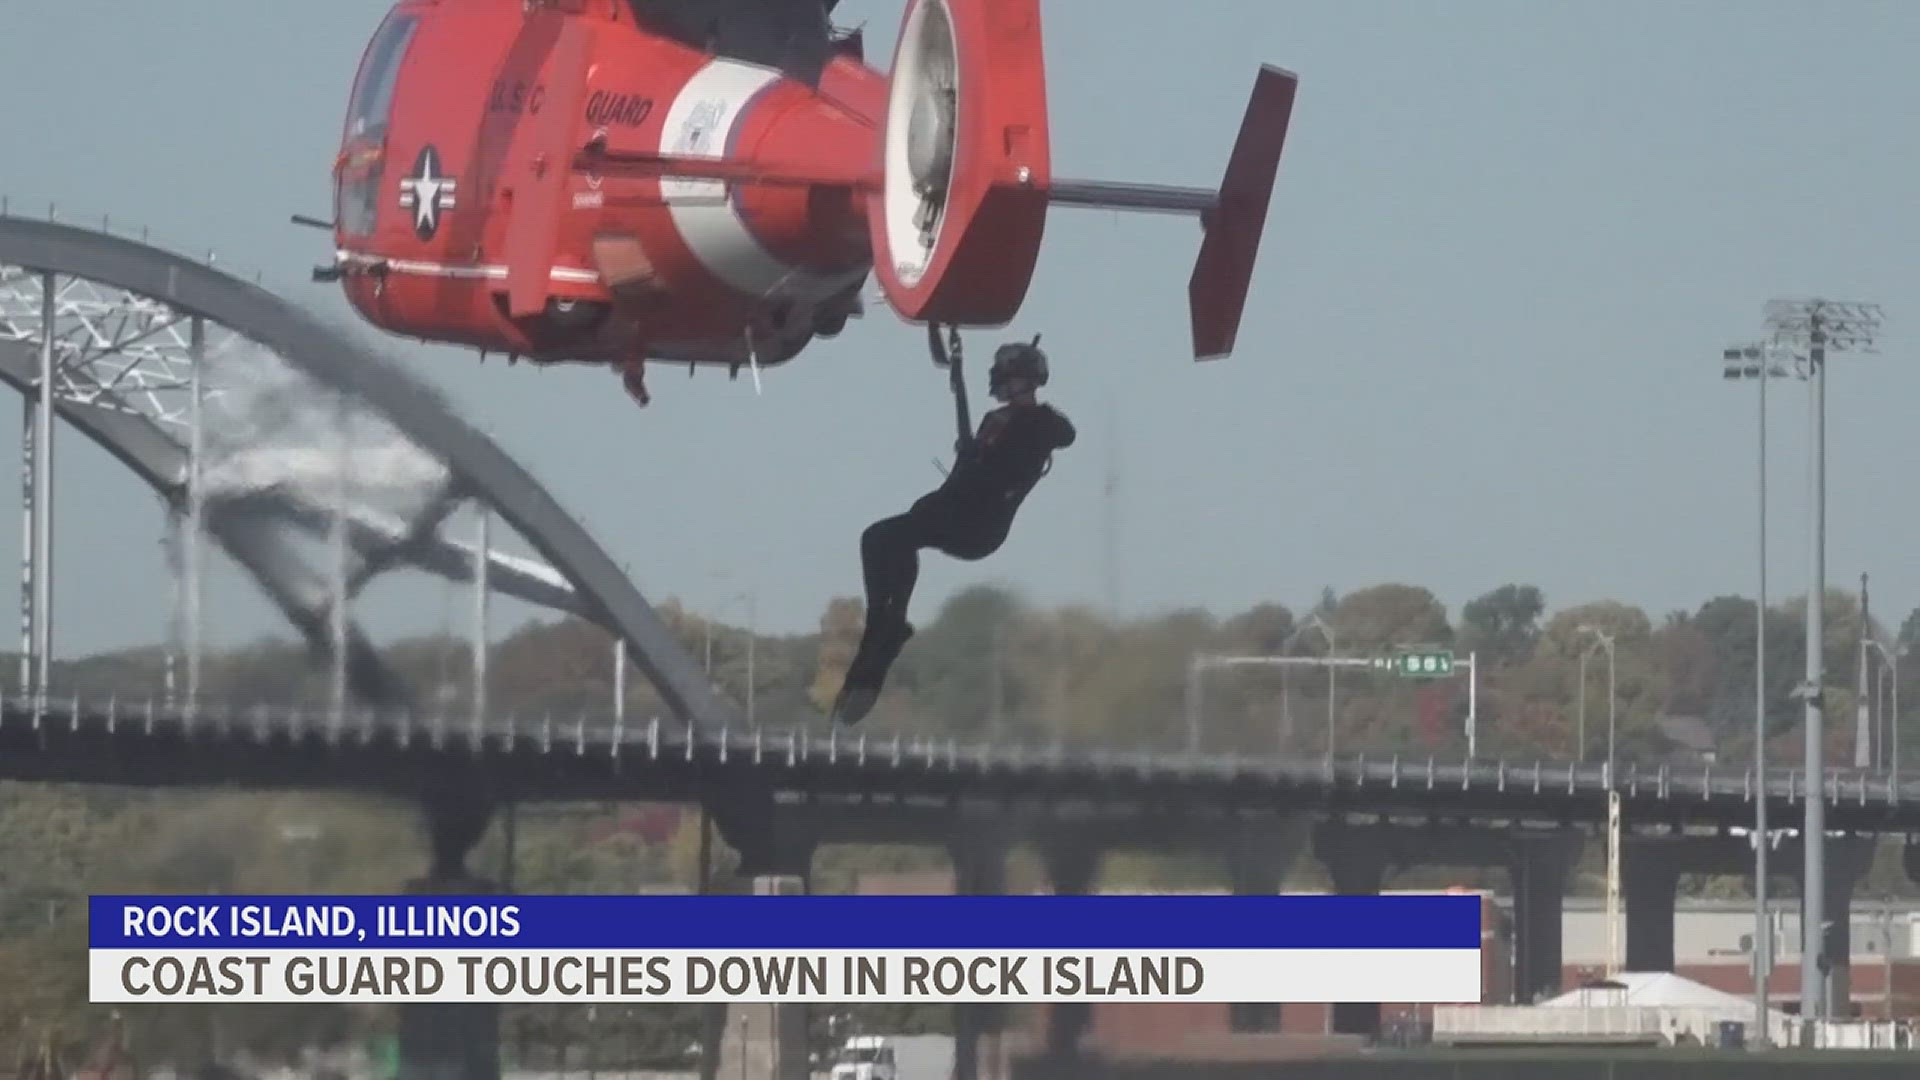 The Coast Guard performed a mock helicopter rescue mission in the Mississippi River.